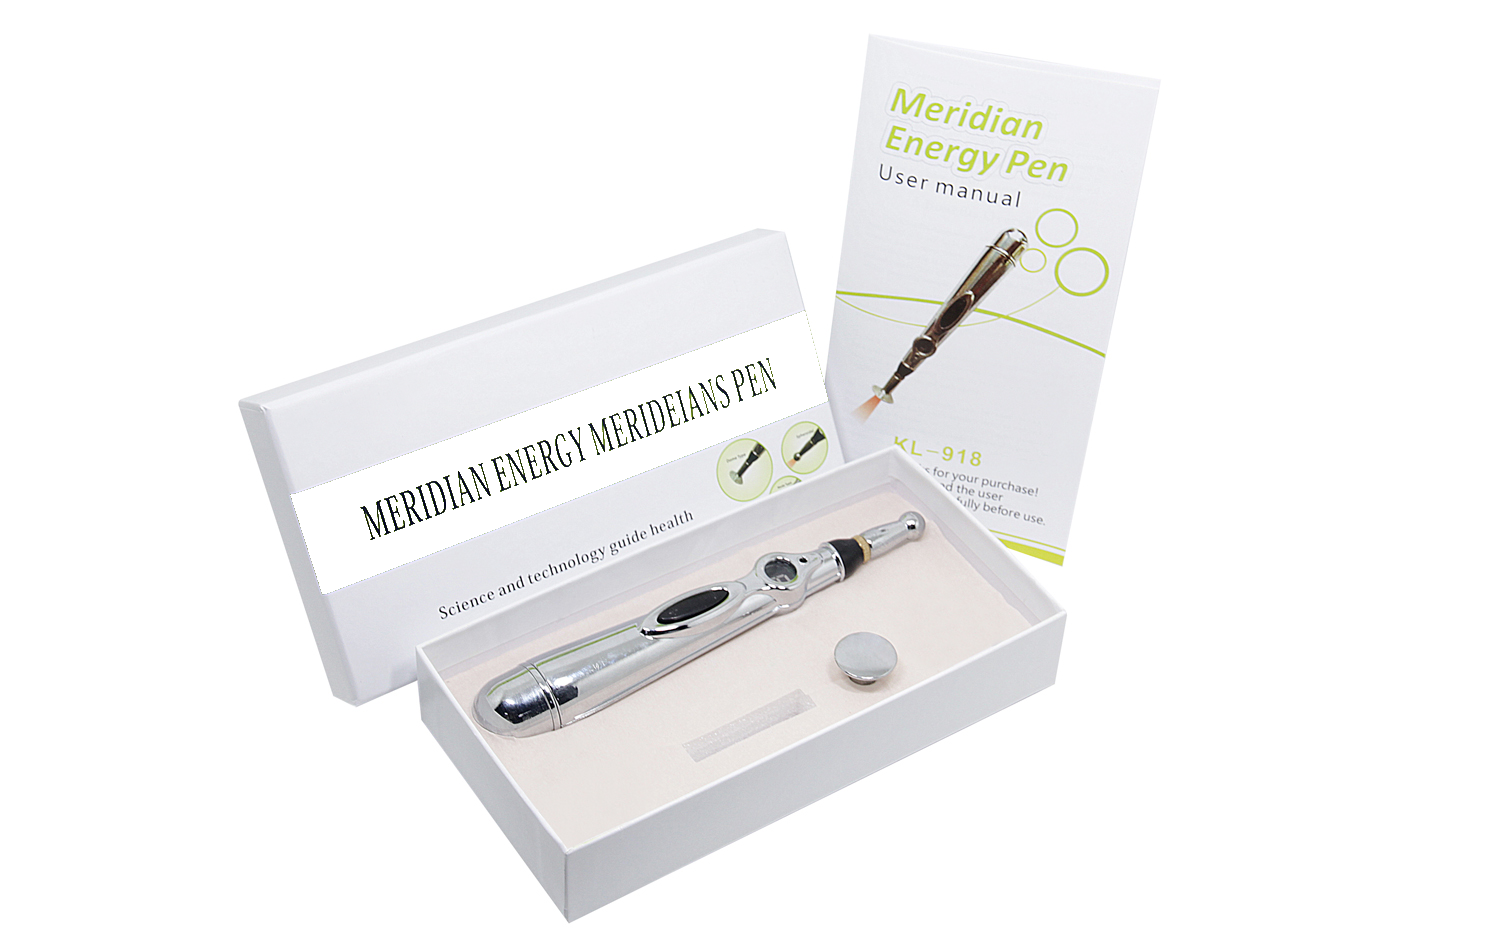 Electromagnetic Acupuncture Pen – Are traditional acupuncture treatments over?